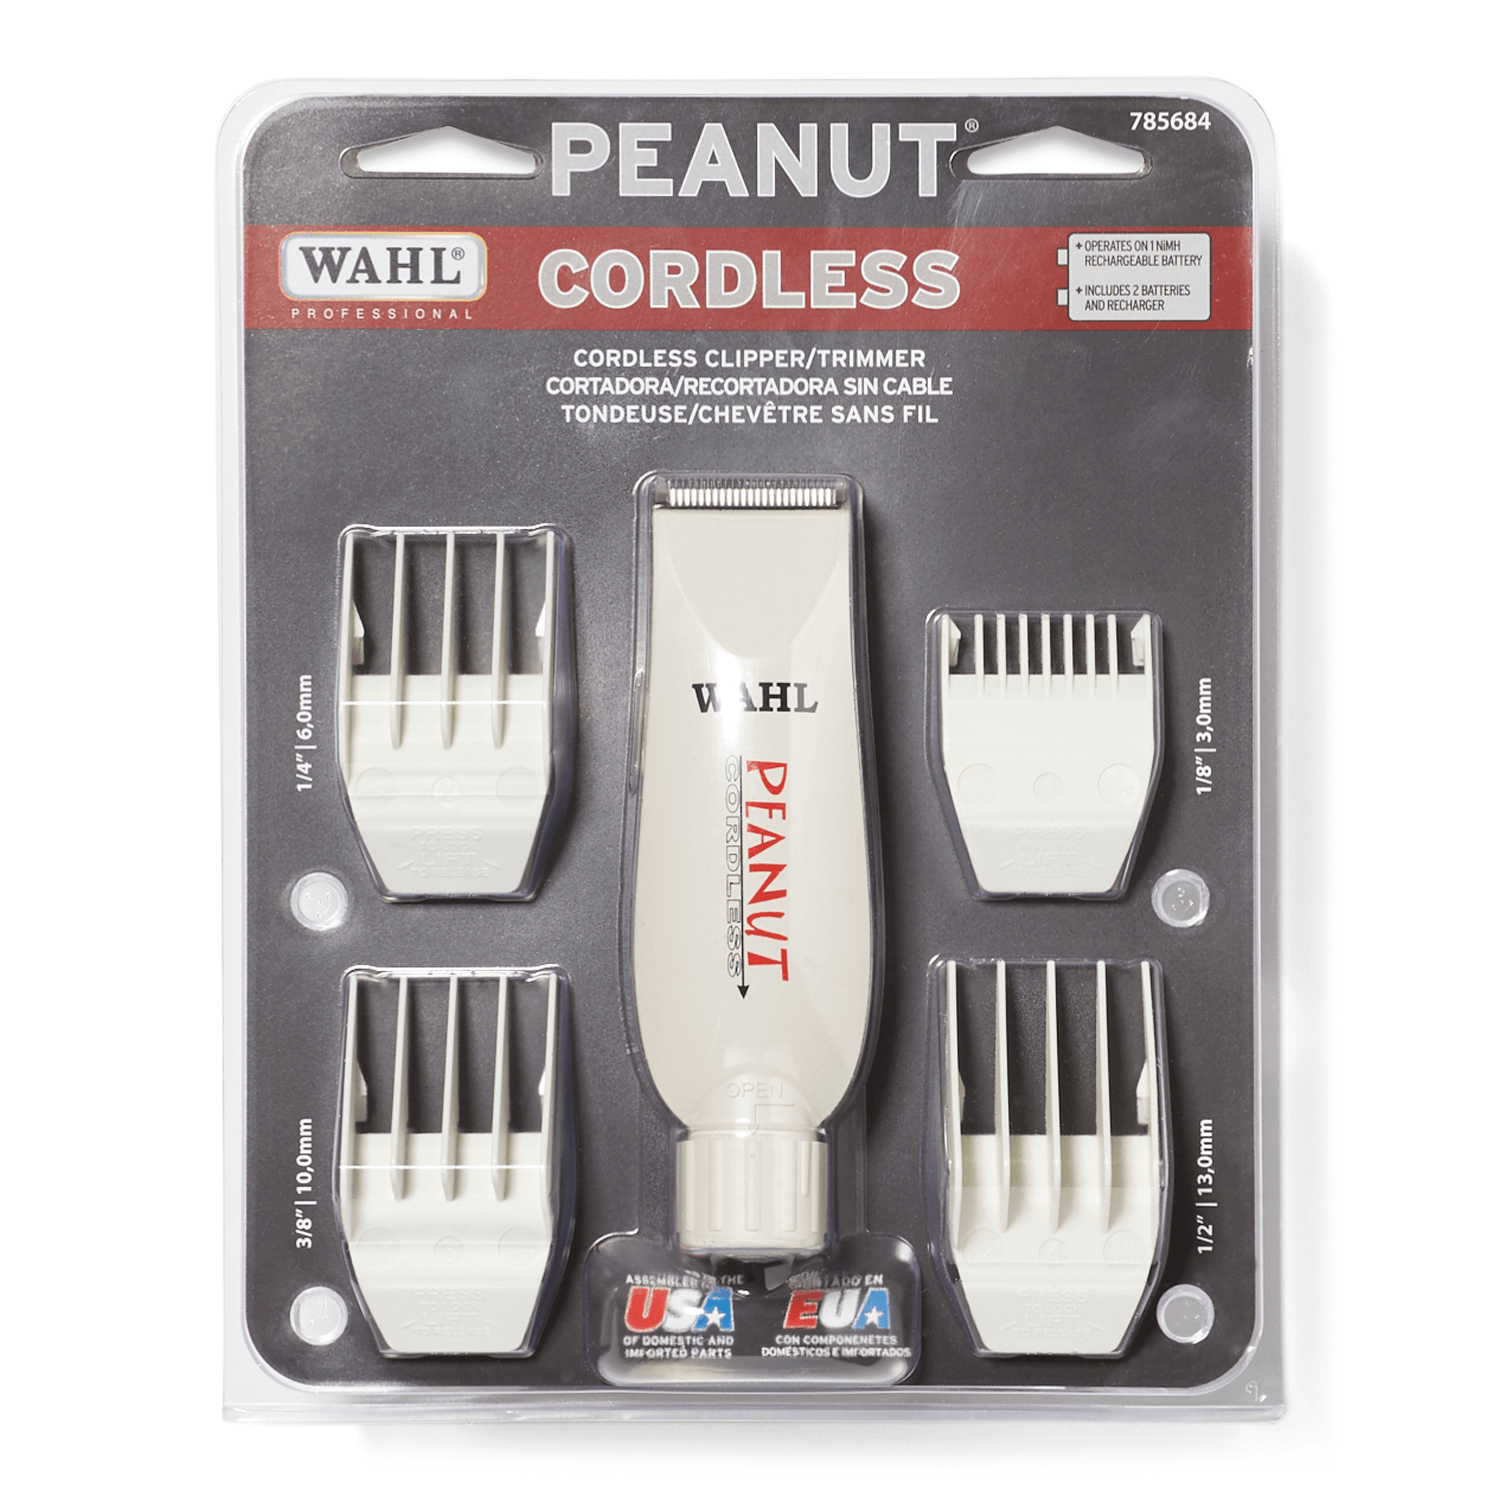 wahl peanut trimmer attachments